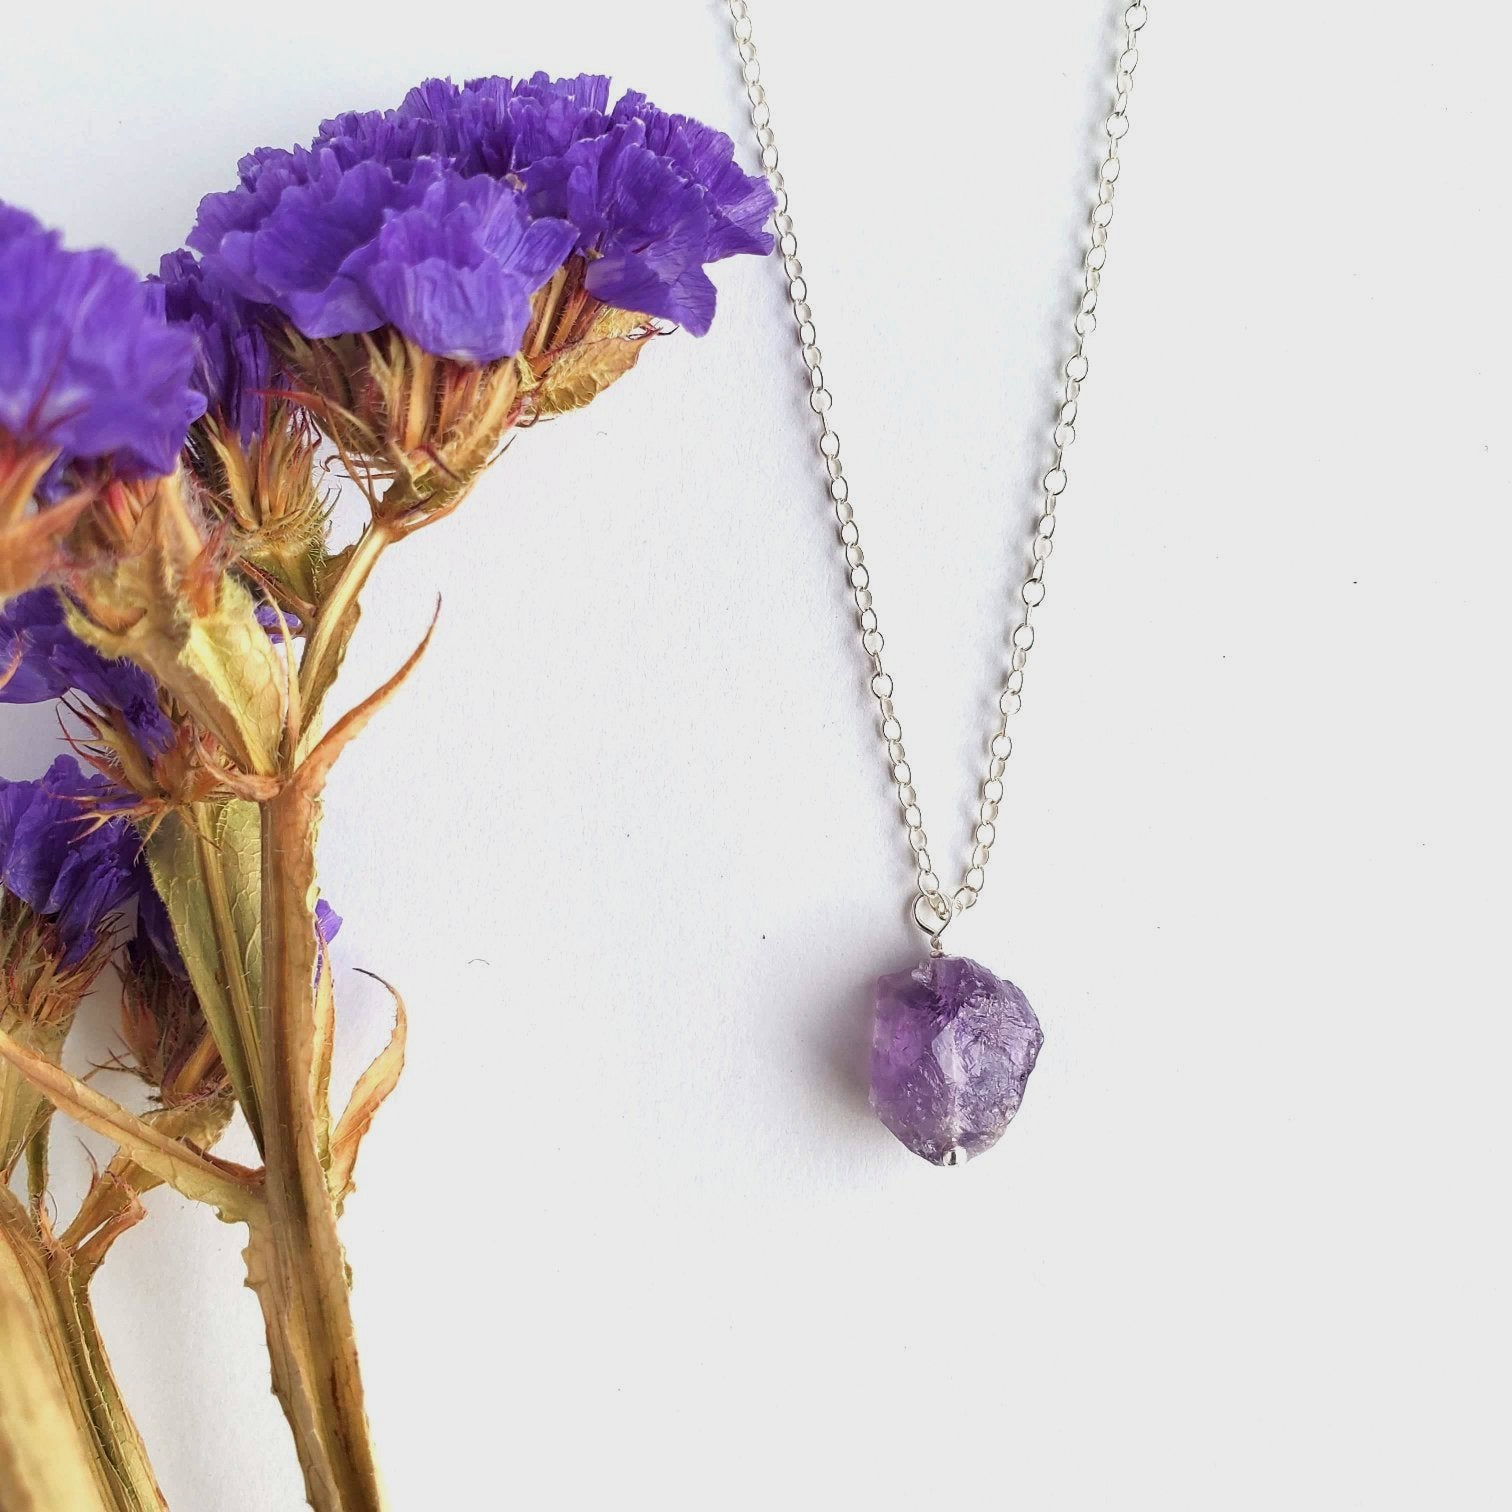 Sterling Silver Amethyst Crystal Necklace